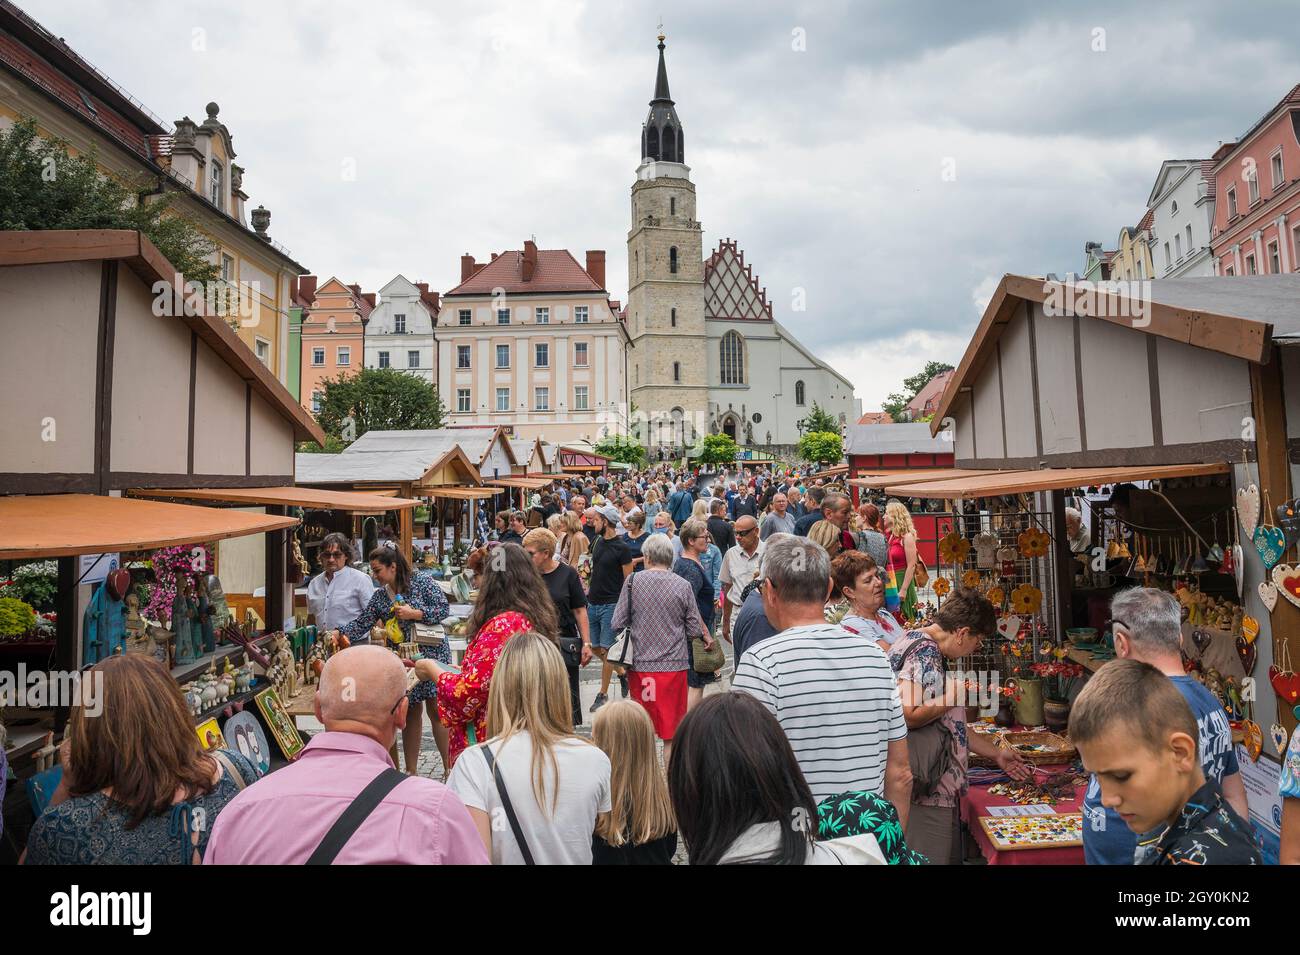 BOLESLAWIEC, POLAND - AUGUST 22, 2021:  A Crowd of people at the Market Square during the Pottery Festival in Bolesławiec Stock Photo